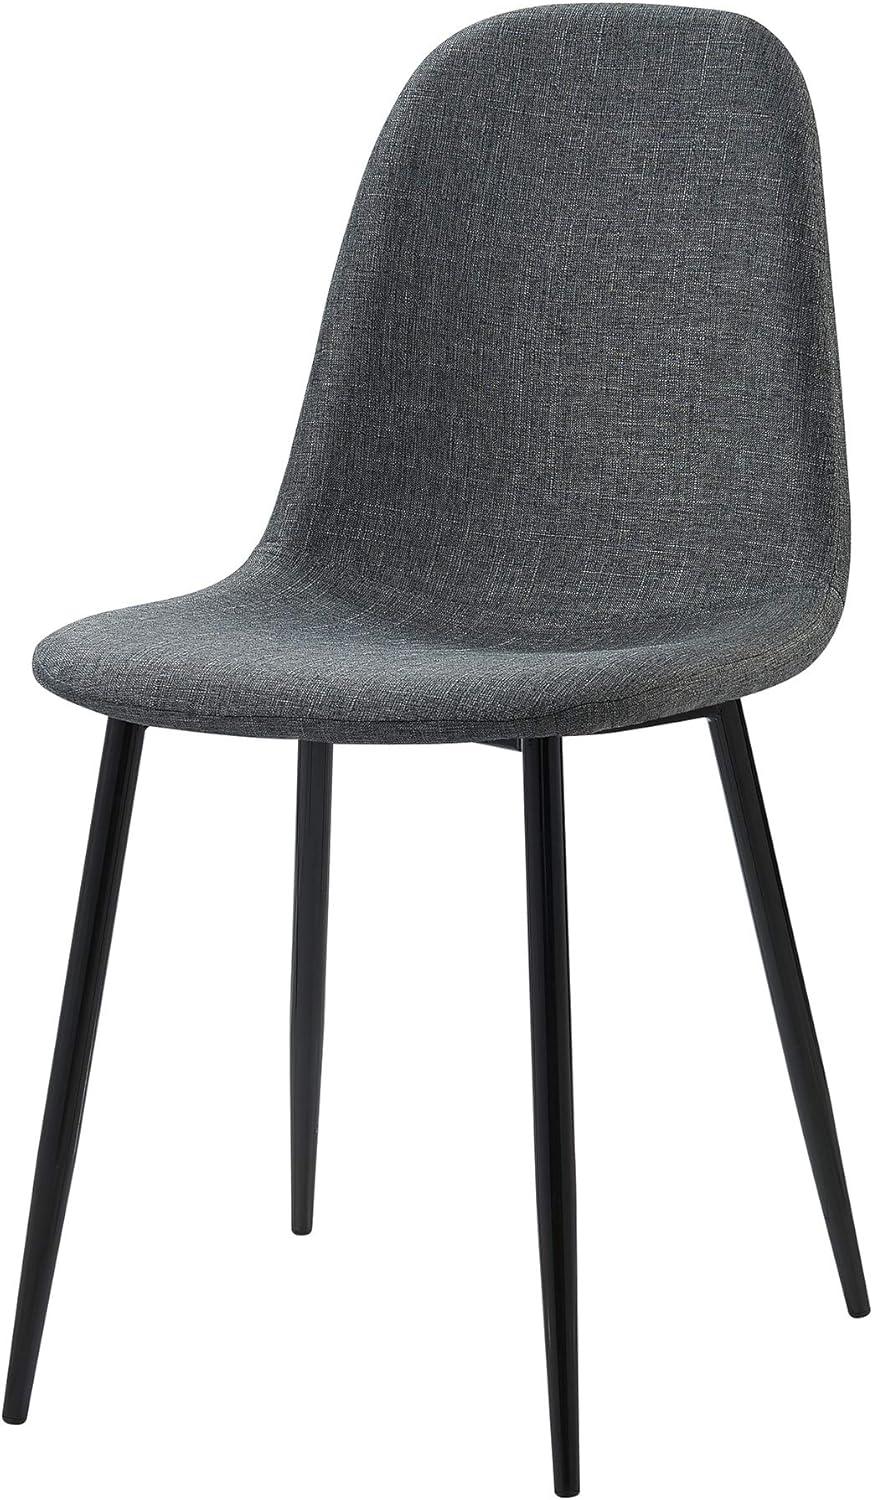 Minimalista Dark Gray Upholstered Dining Chair with Black Metal Legs, Set of 2